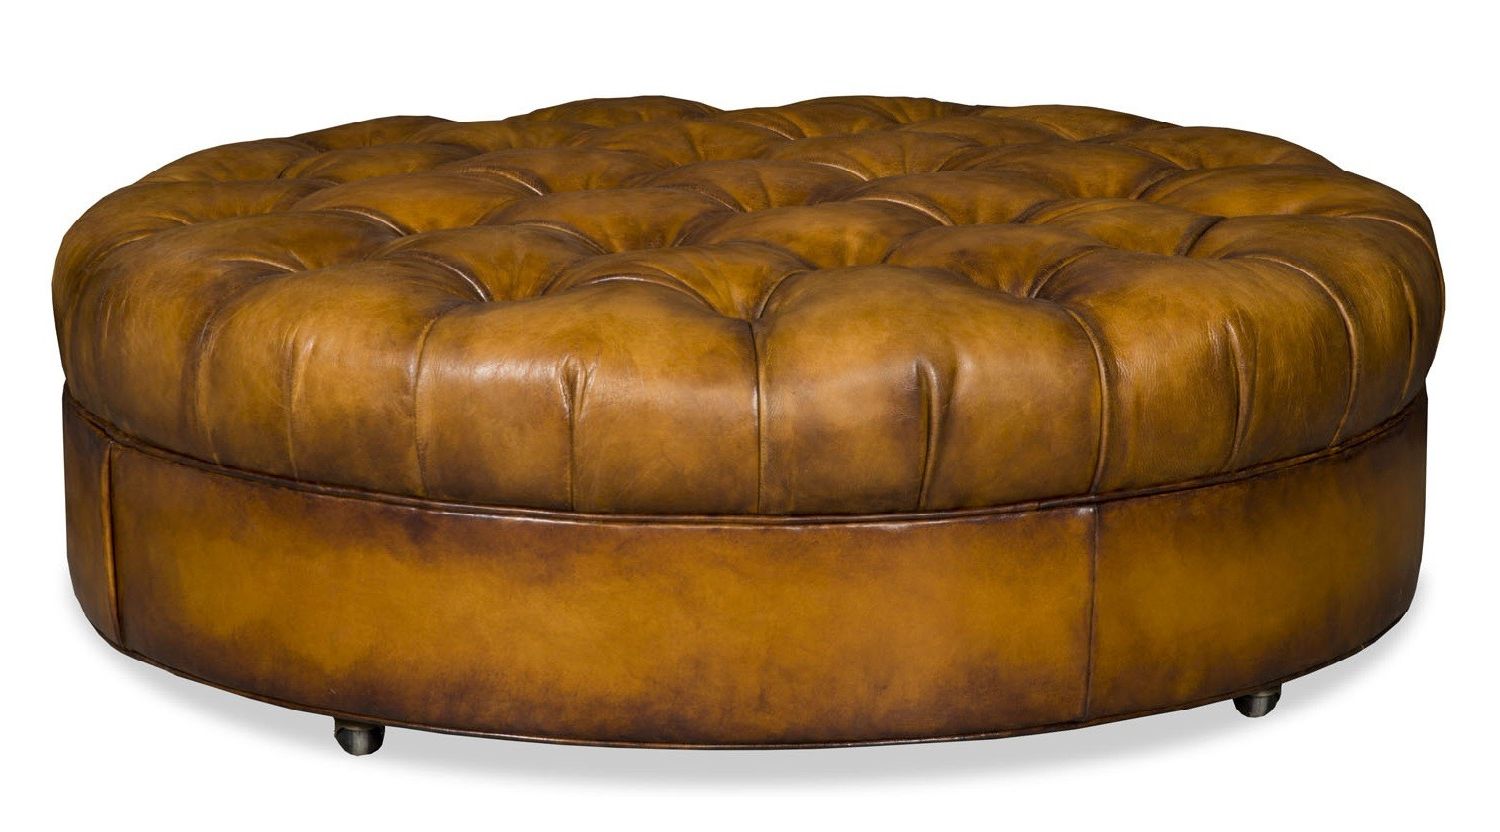 Most Current Round Leather Tufted Ottoman Intended For Gold And White Leather Round Ottomans (View 2 of 10)